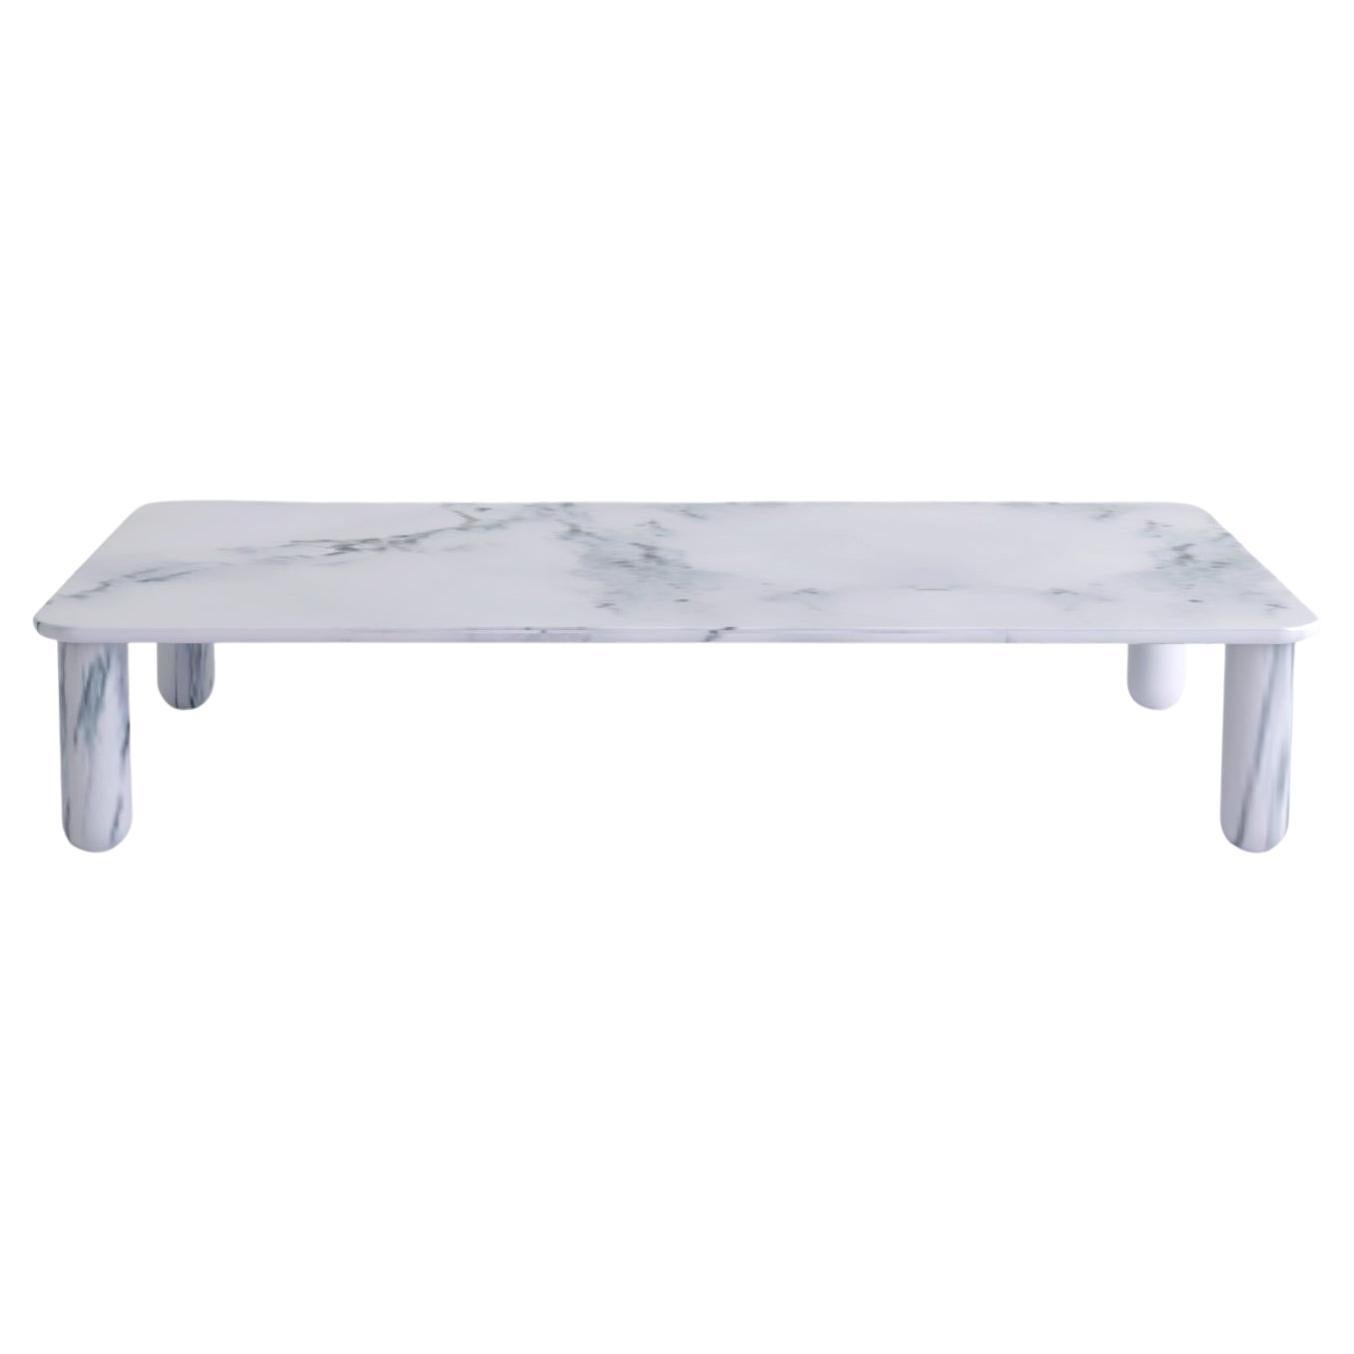 XLarge White Marble "Sunday" Coffee Table, Jean-Baptiste Souletie For Sale